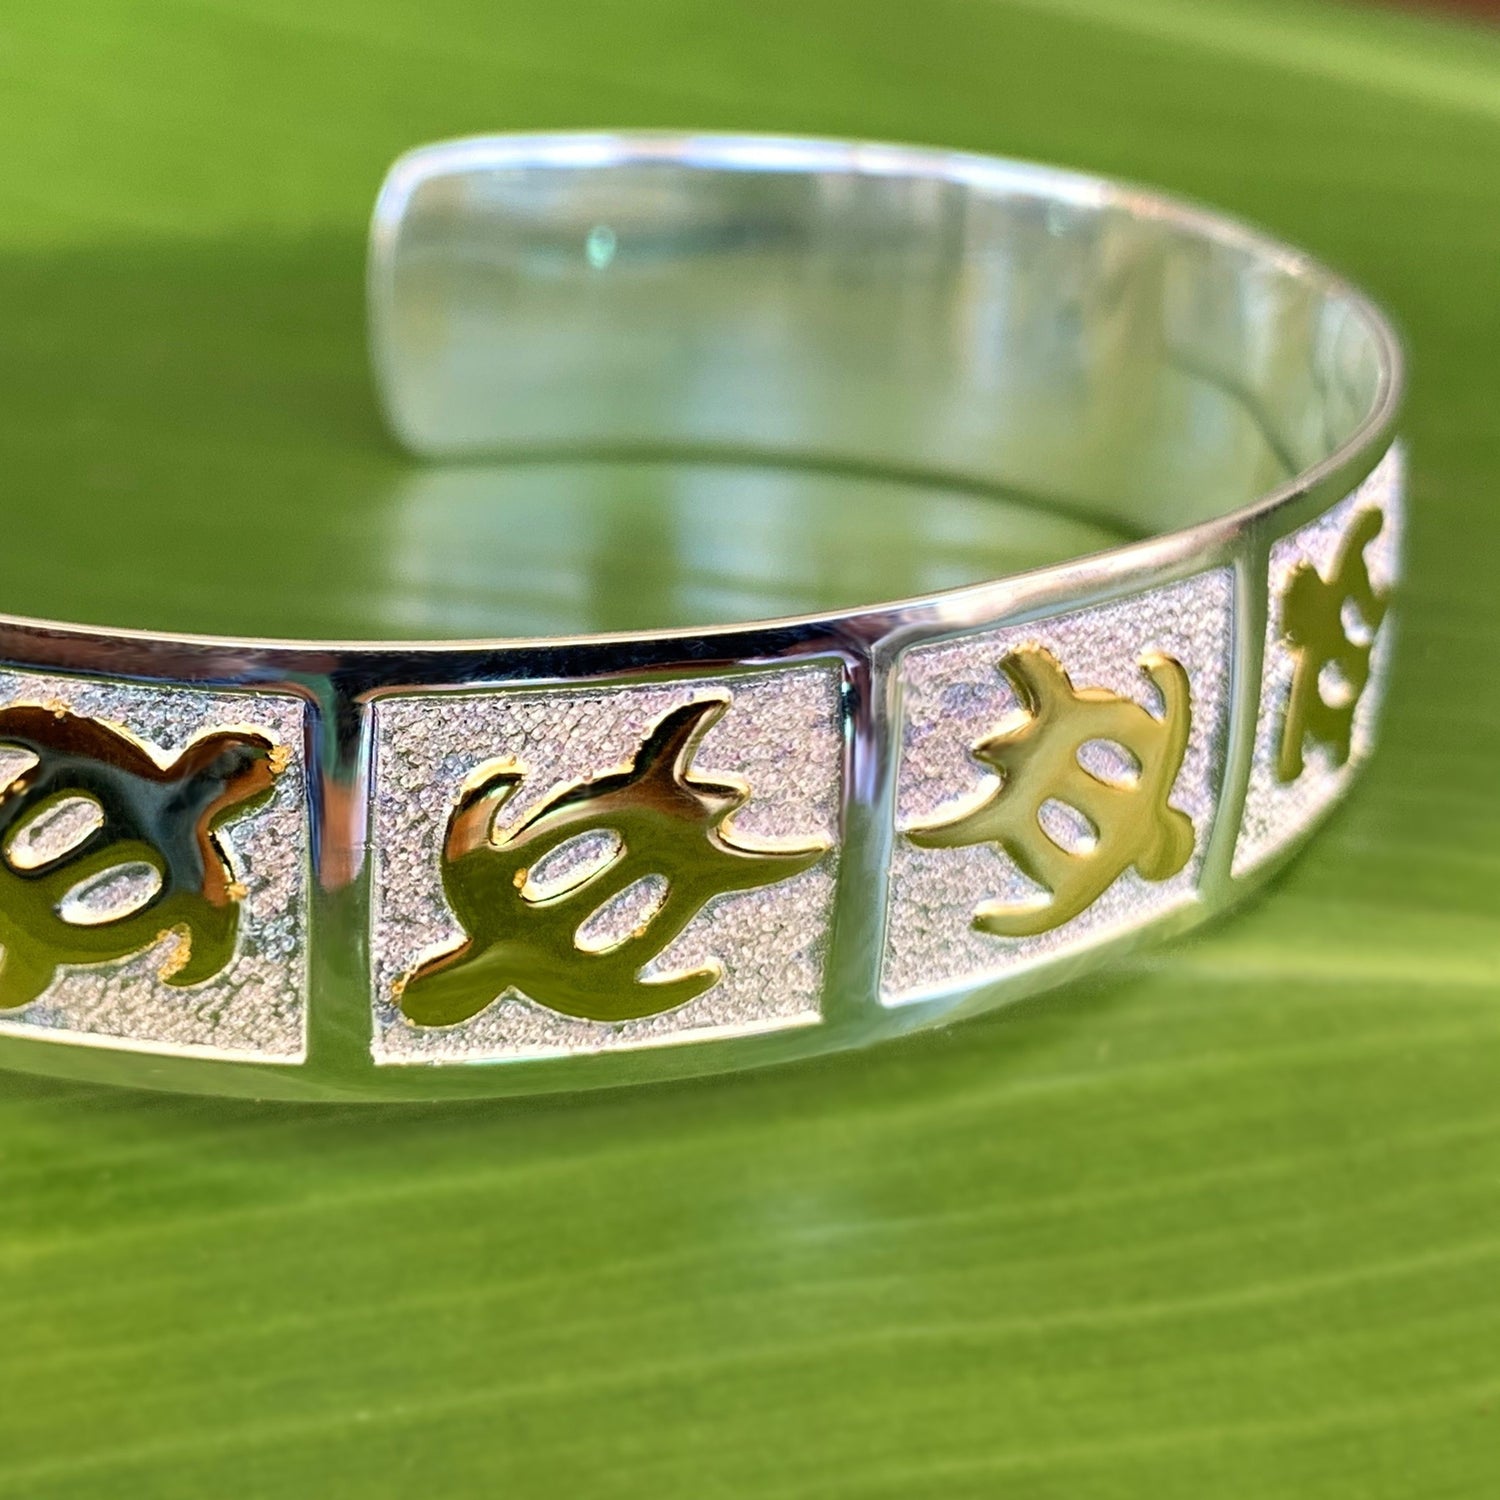 Another Close up of petroglyph honu cuff with gold honus in alternating directions on a pebble design background with a mirrored sterling silver base.